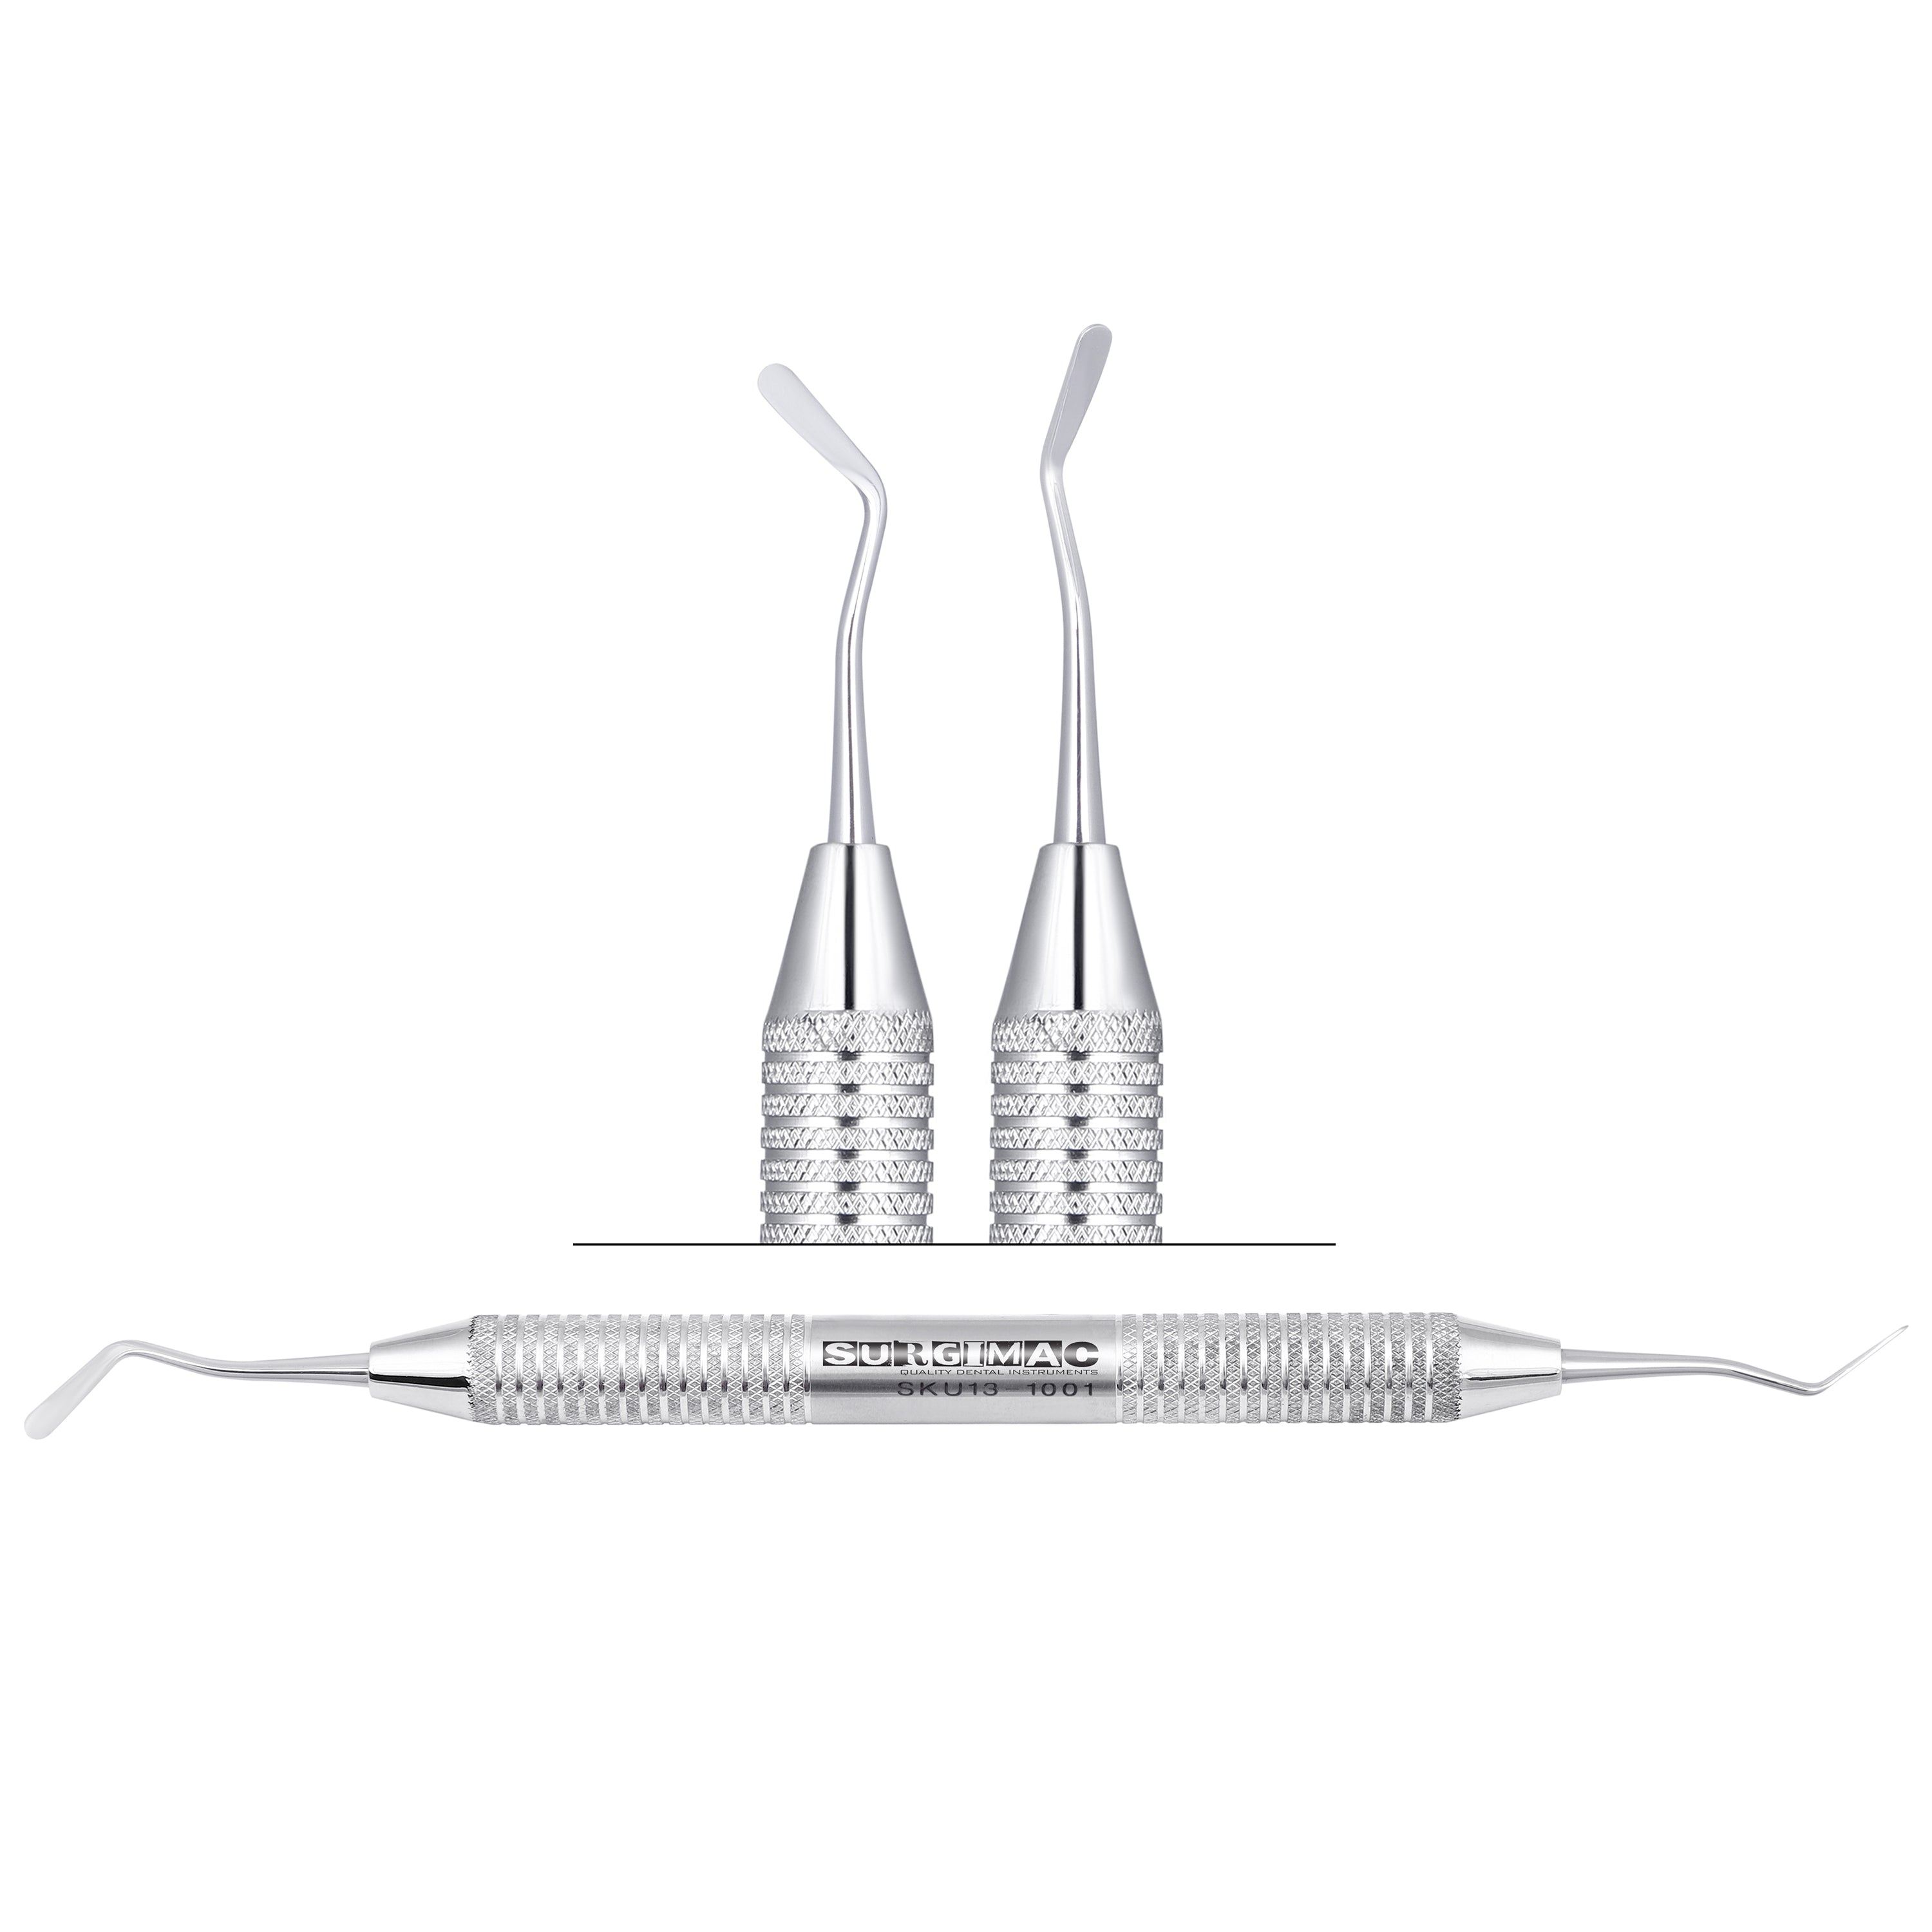 SurgiMac #6 Dental Plastic Filling Instrument, Air series, 1/pk. - Double-Sided Stainless Steel